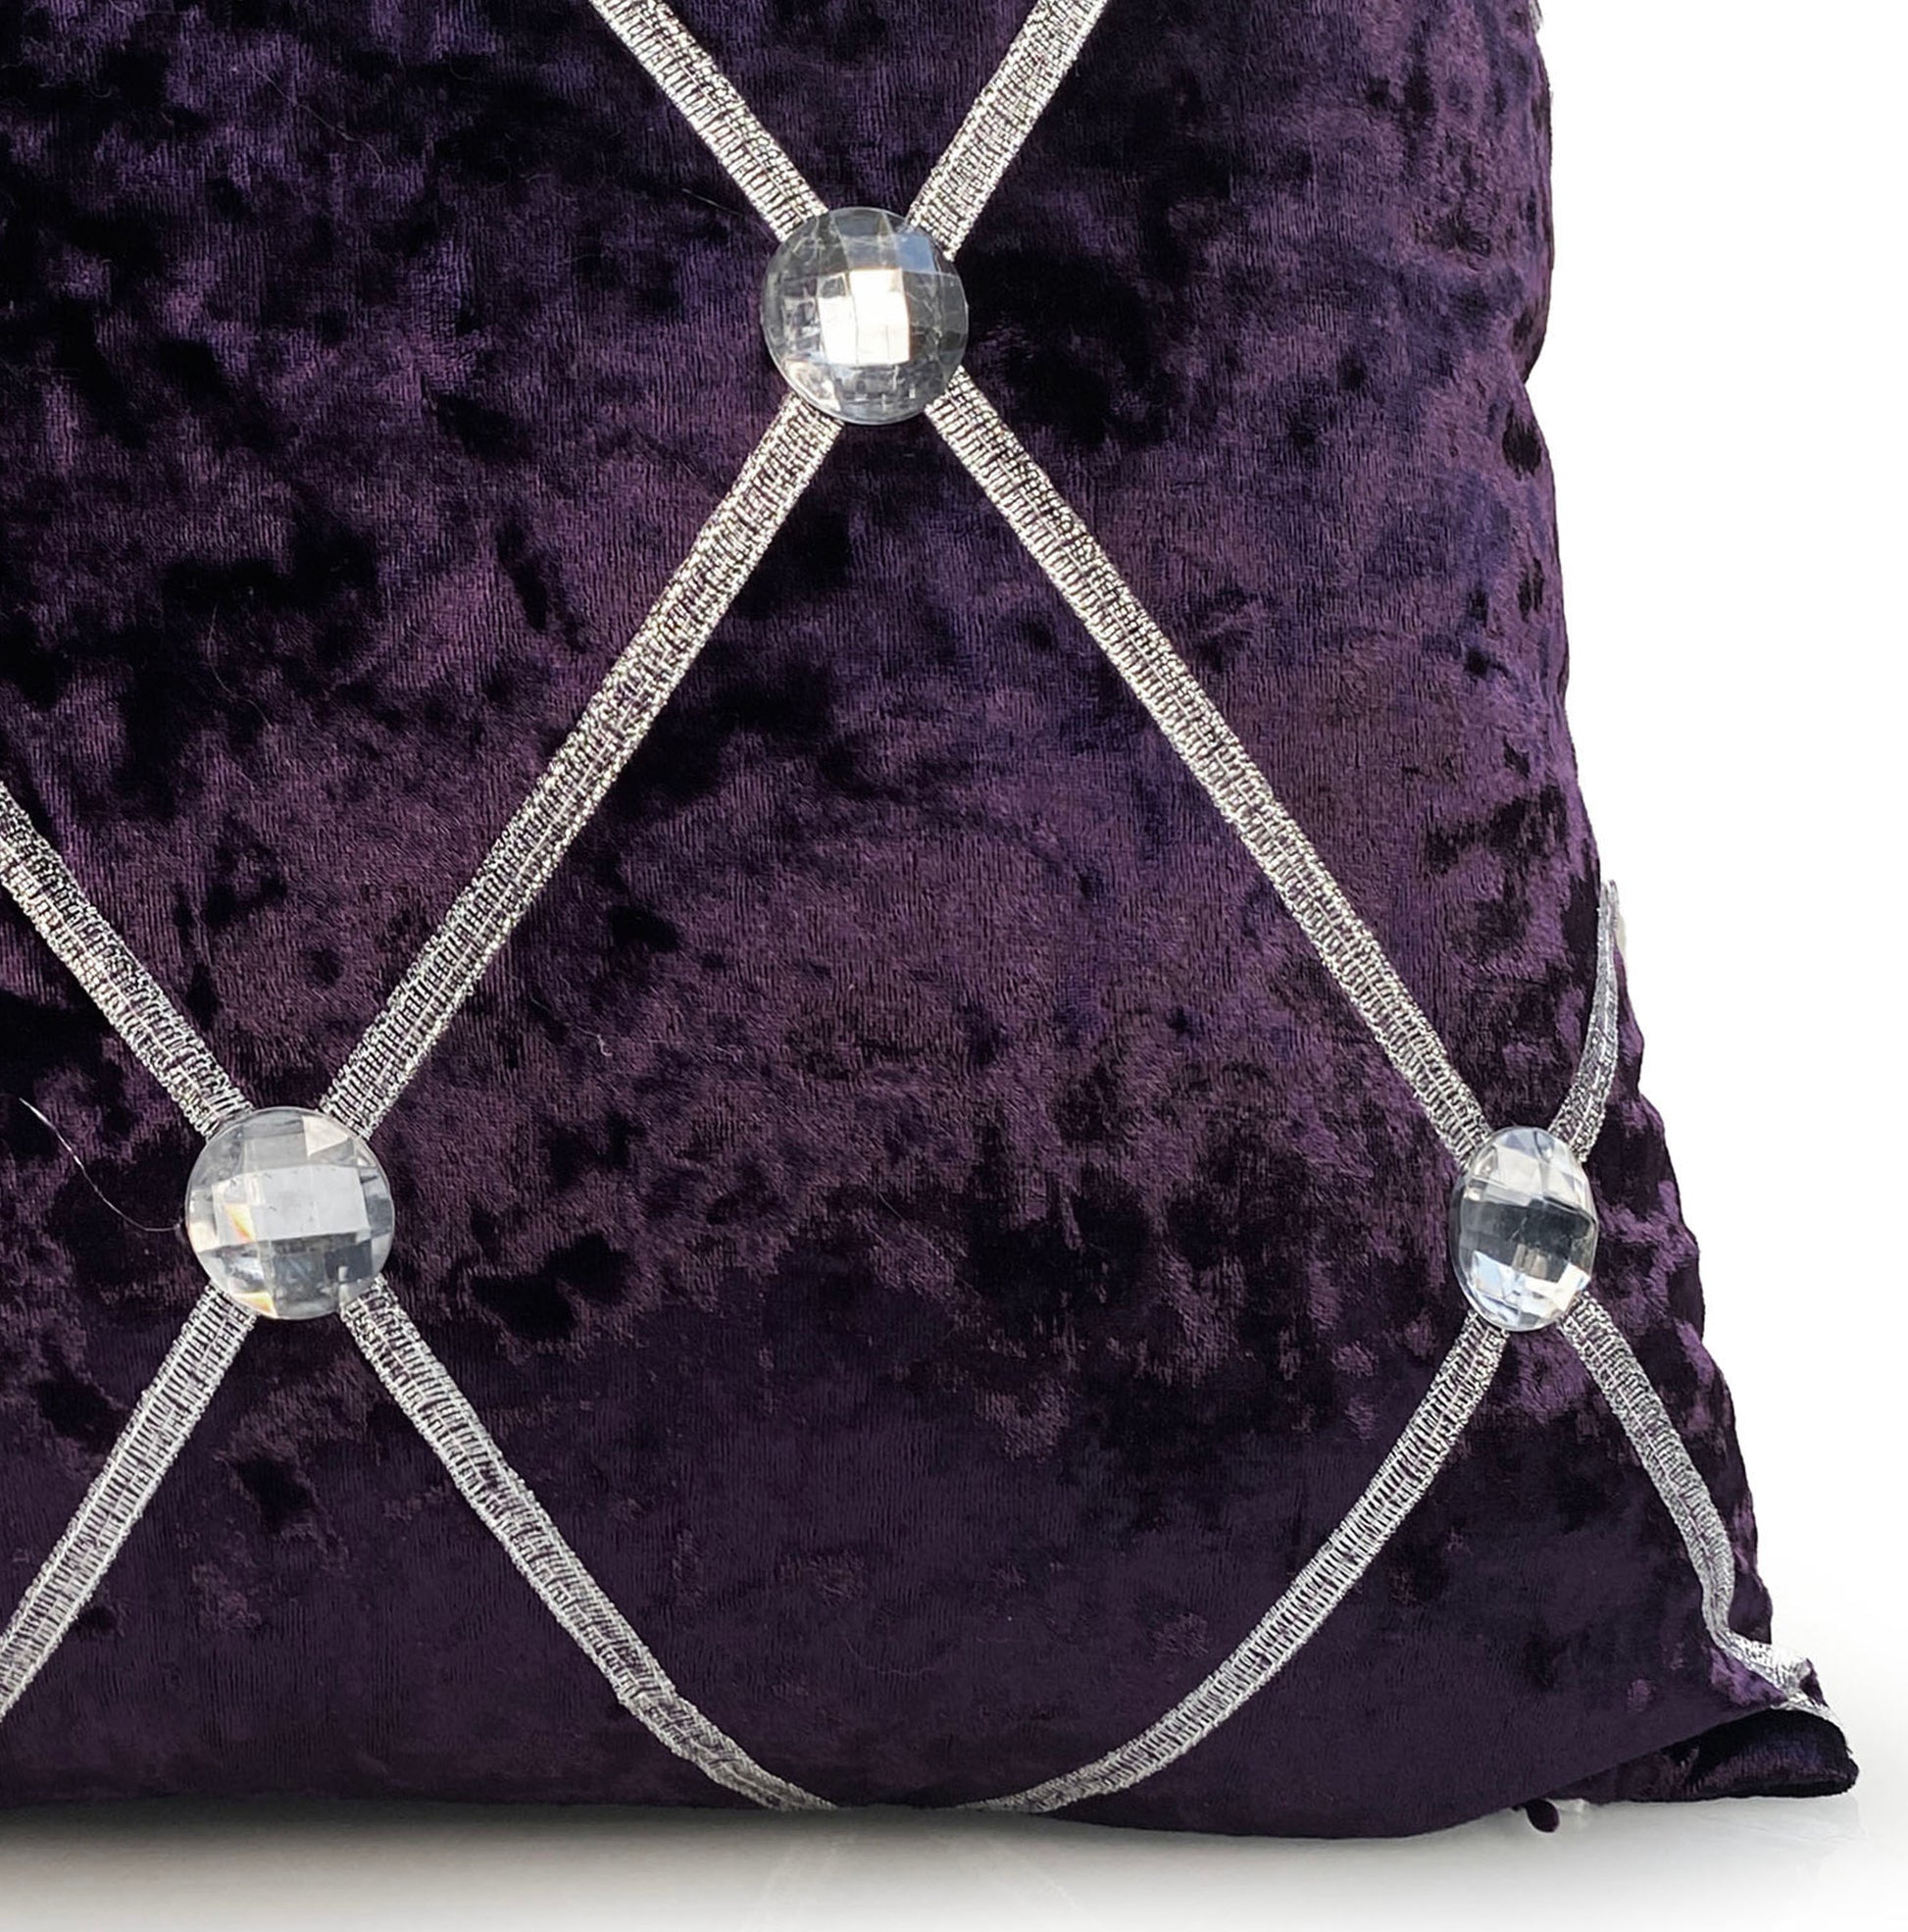 Large Crush Velvet Cushions or Covers Diamante Chesterfield  3 Sizes PURPLE closer view